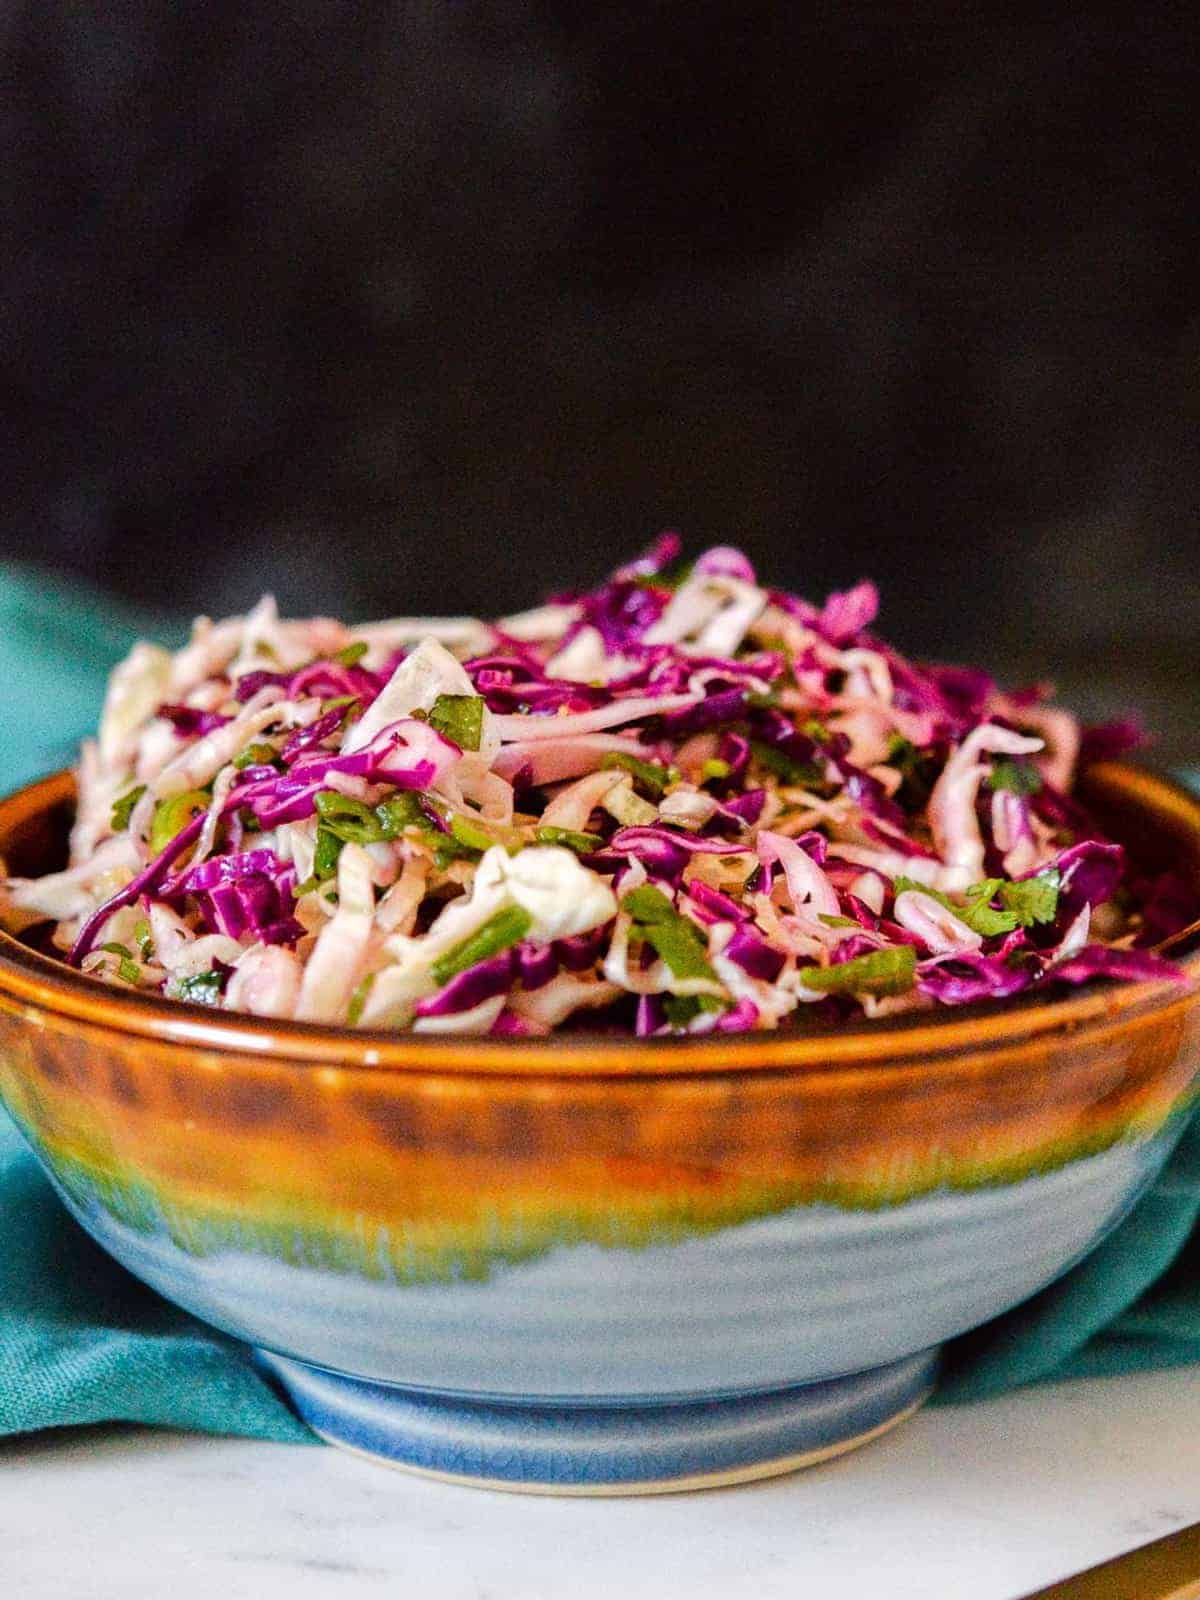 easy taco slaw recipe with red and green cabbage, perfect for fish tacos